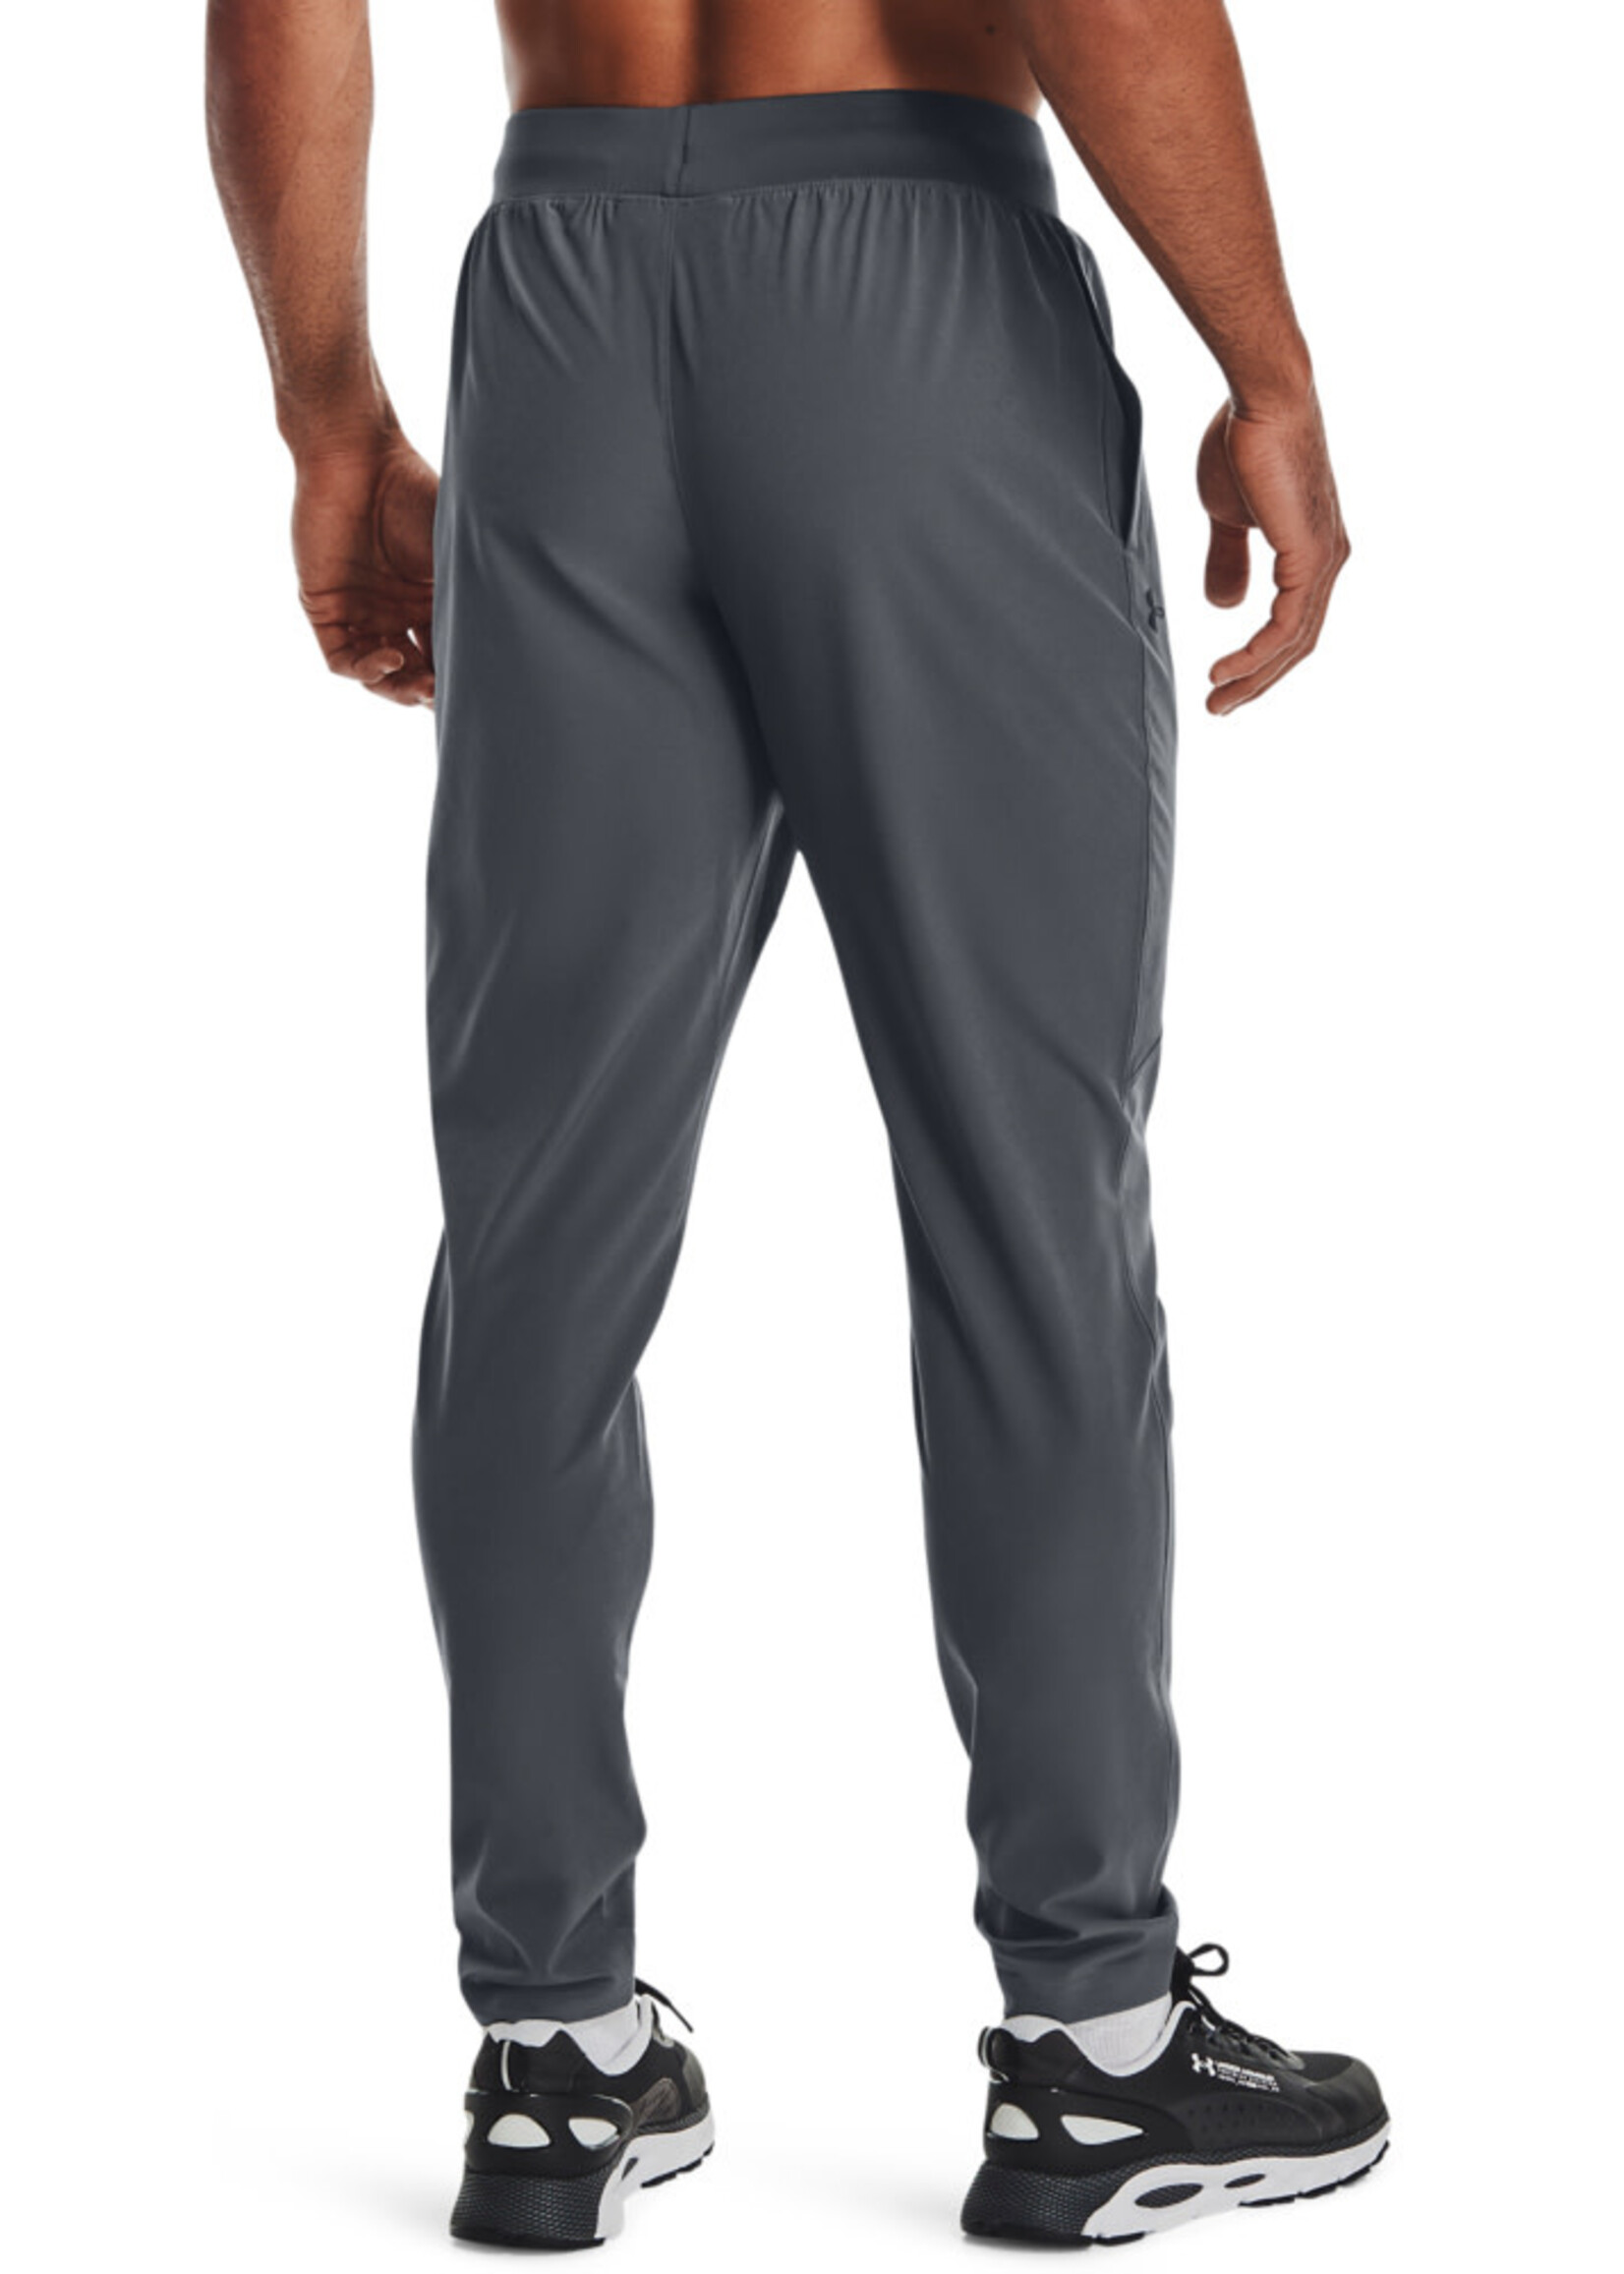 Buy Under Armour UA Woven Stretch Pants online at Sport Conrad